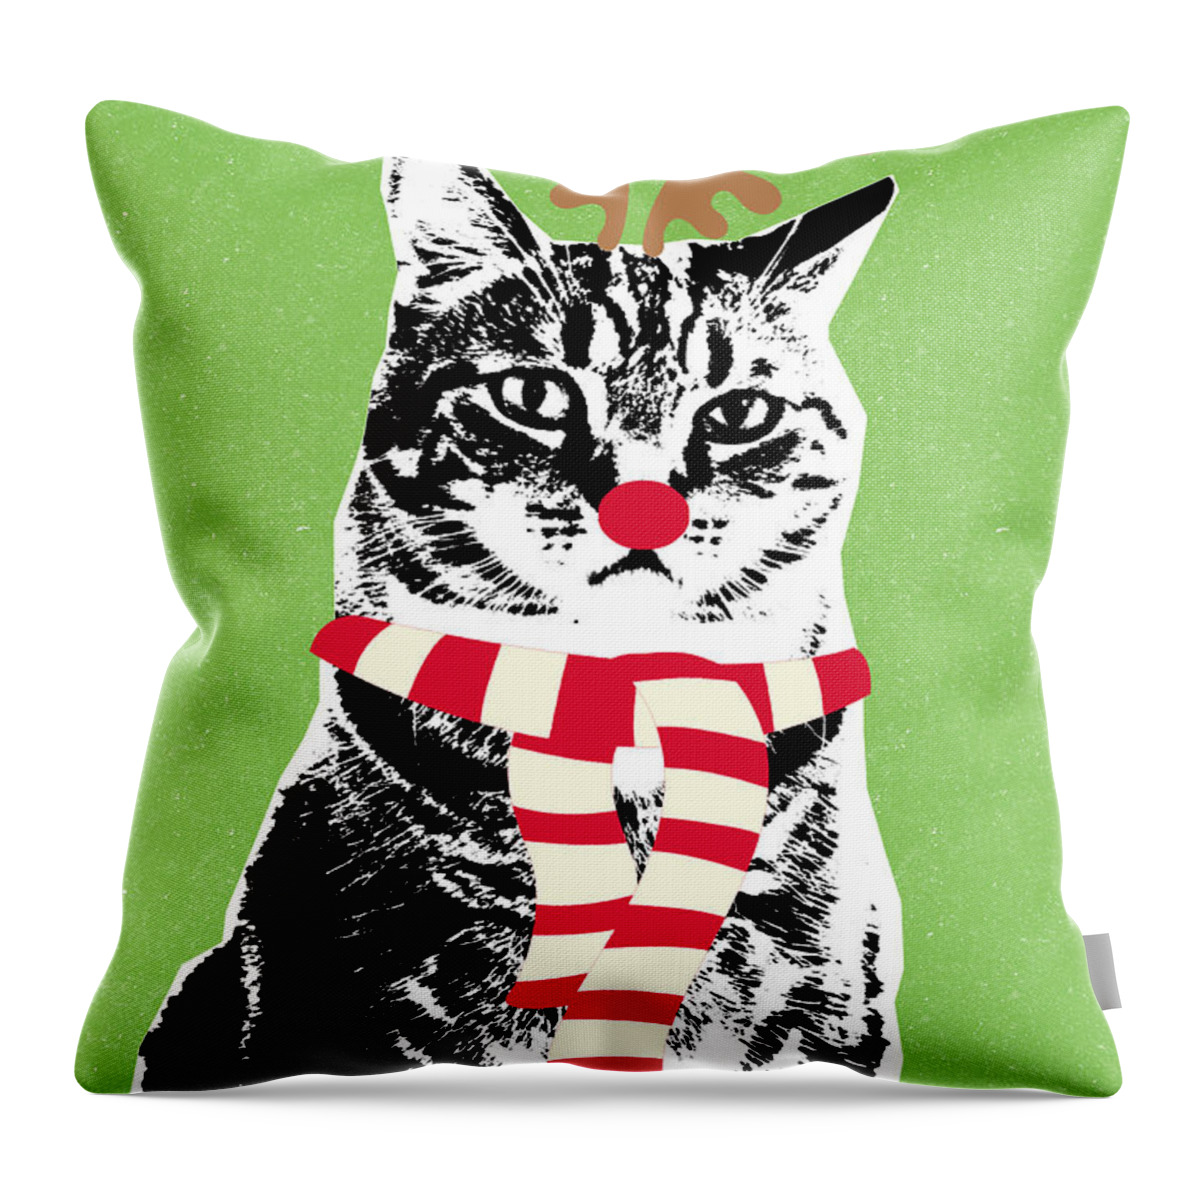 Reindeer Cat Throw Pillow featuring the mixed media Rudolph The Red Nosed Cat- Art by Linda Woods by Linda Woods